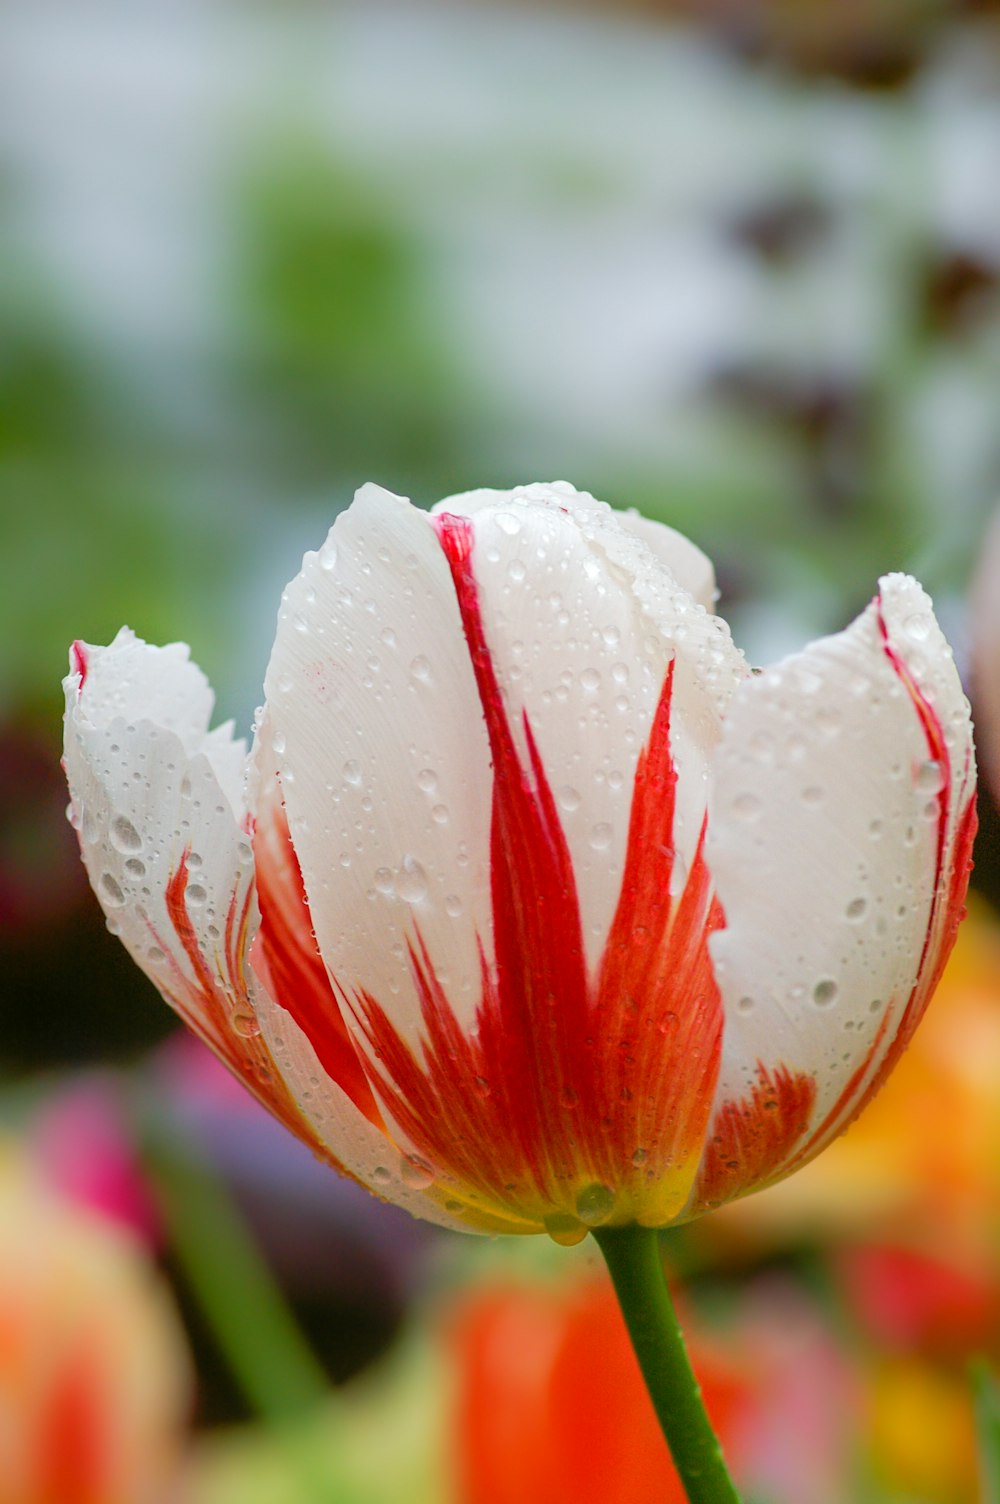 a red and white flower with water droplets on it